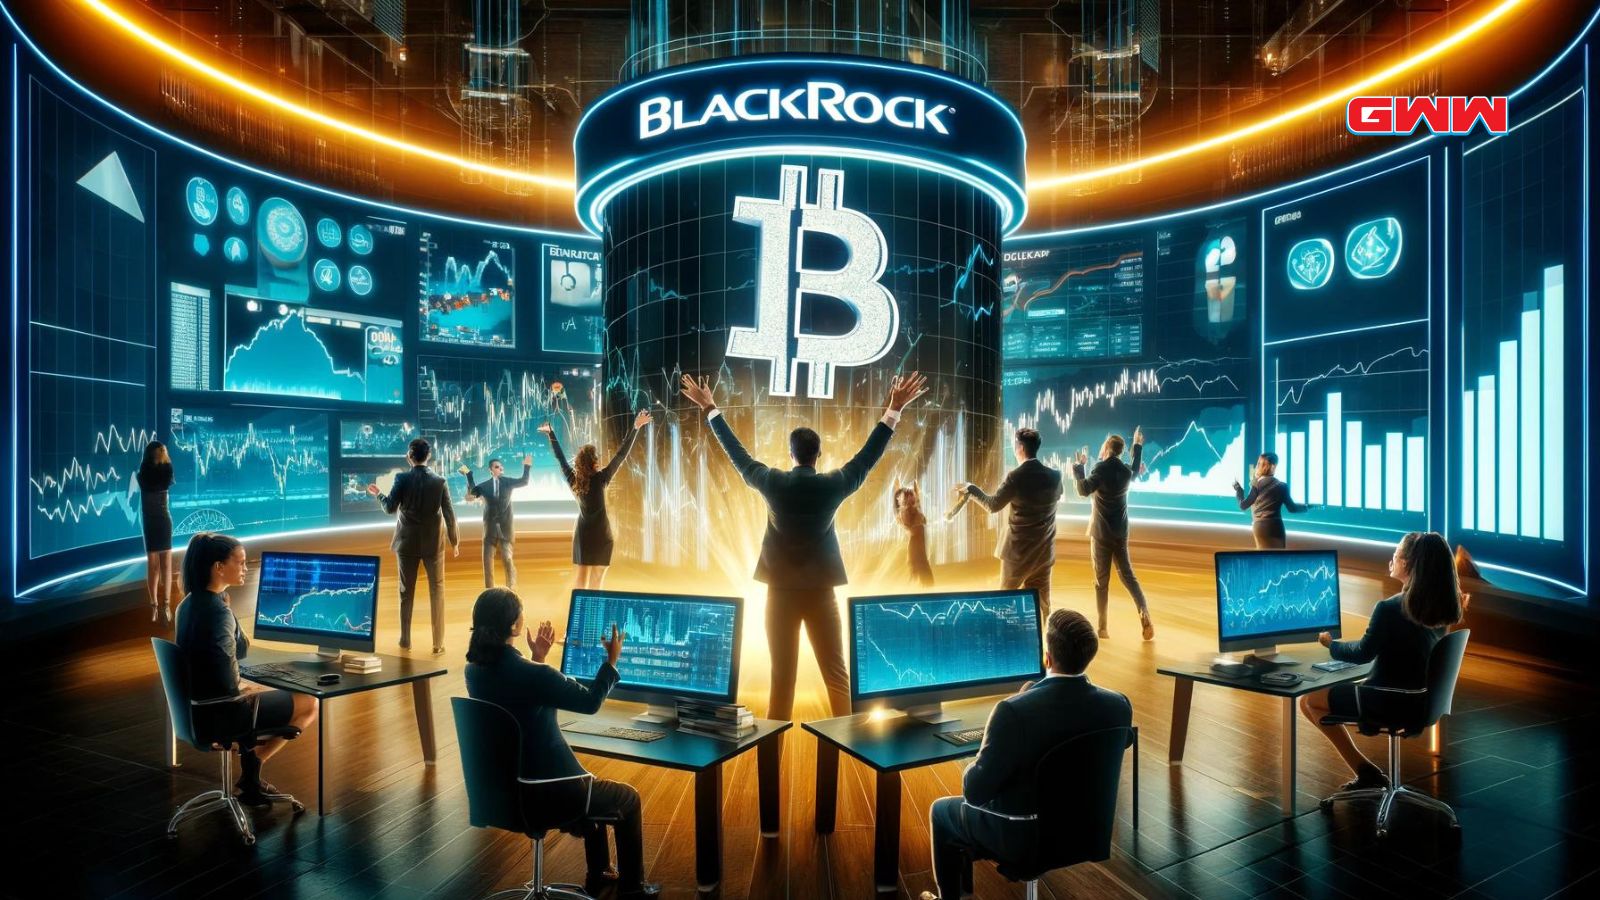 A financial scene showcasing BlackRock's ETF becoming the largest Bitcoin fund in the world